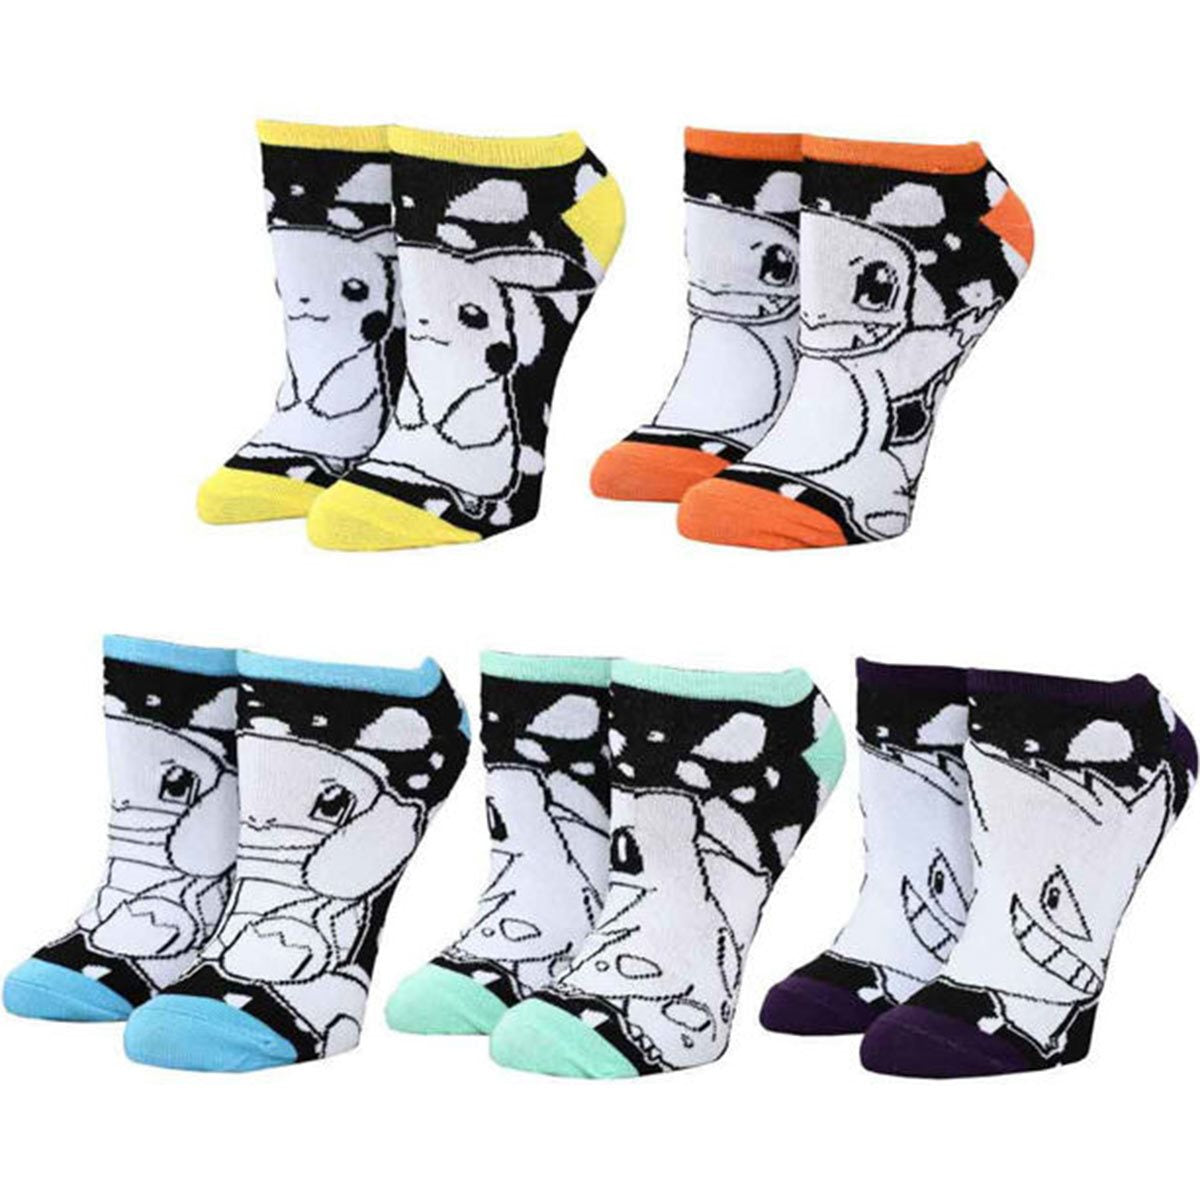 Pokémon - Characters Youth Ankle Sock 5-Pack